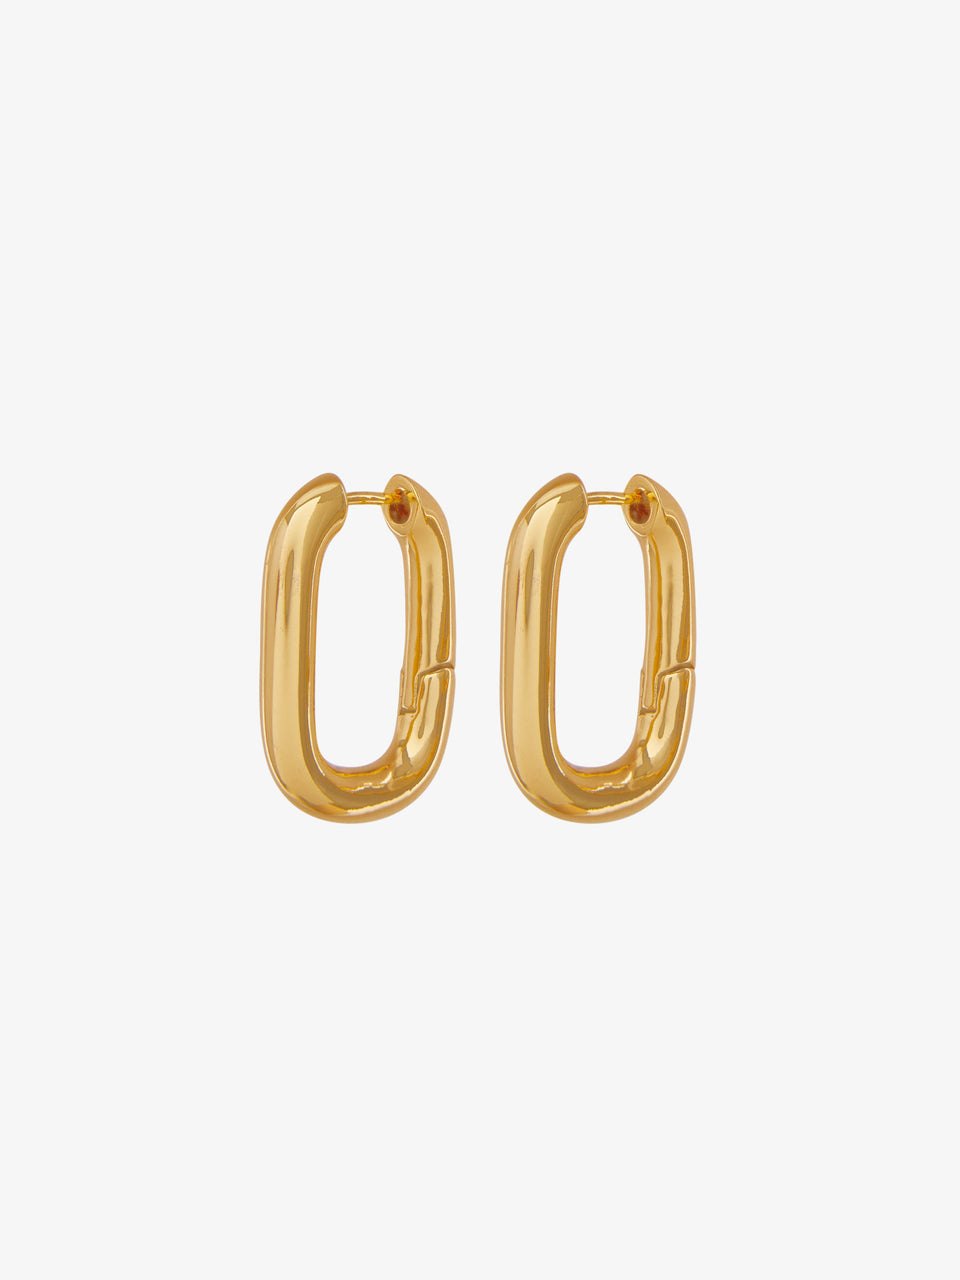 Oma_The_Label_The_Tonia_Earrings_Gold